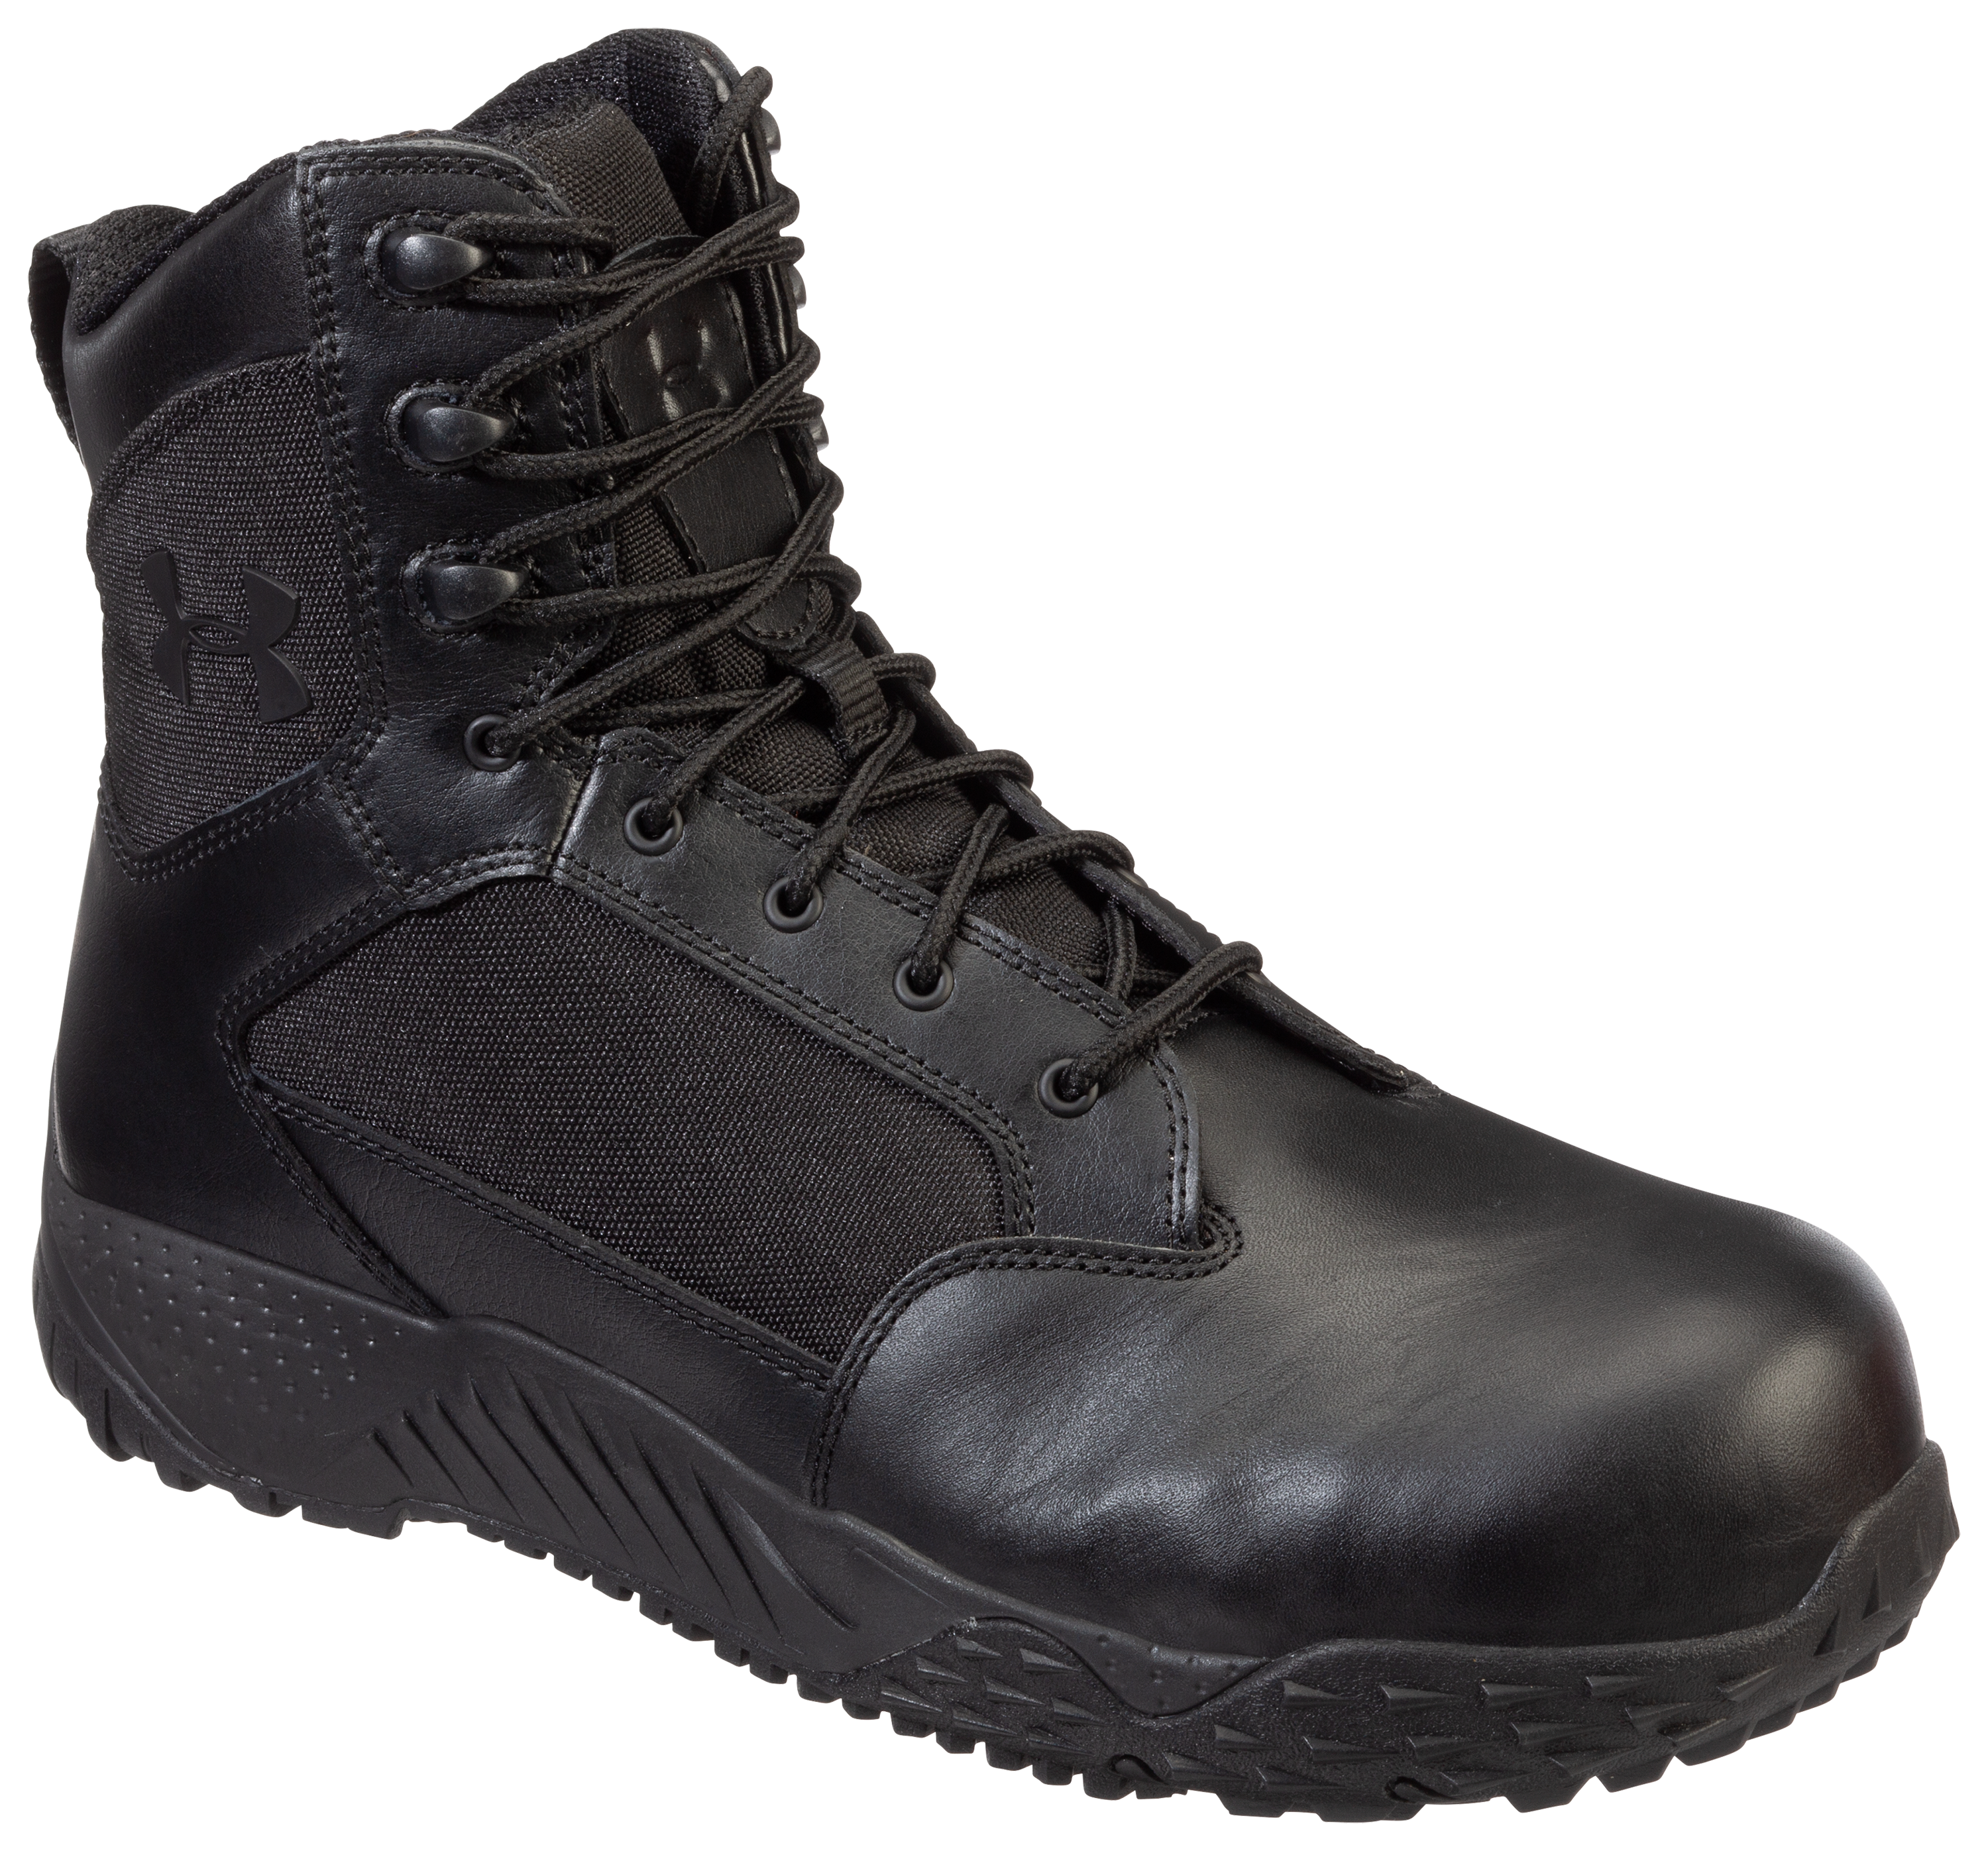 Under Armour Stellar Protect Composite Toe Tactical Duty Boots for